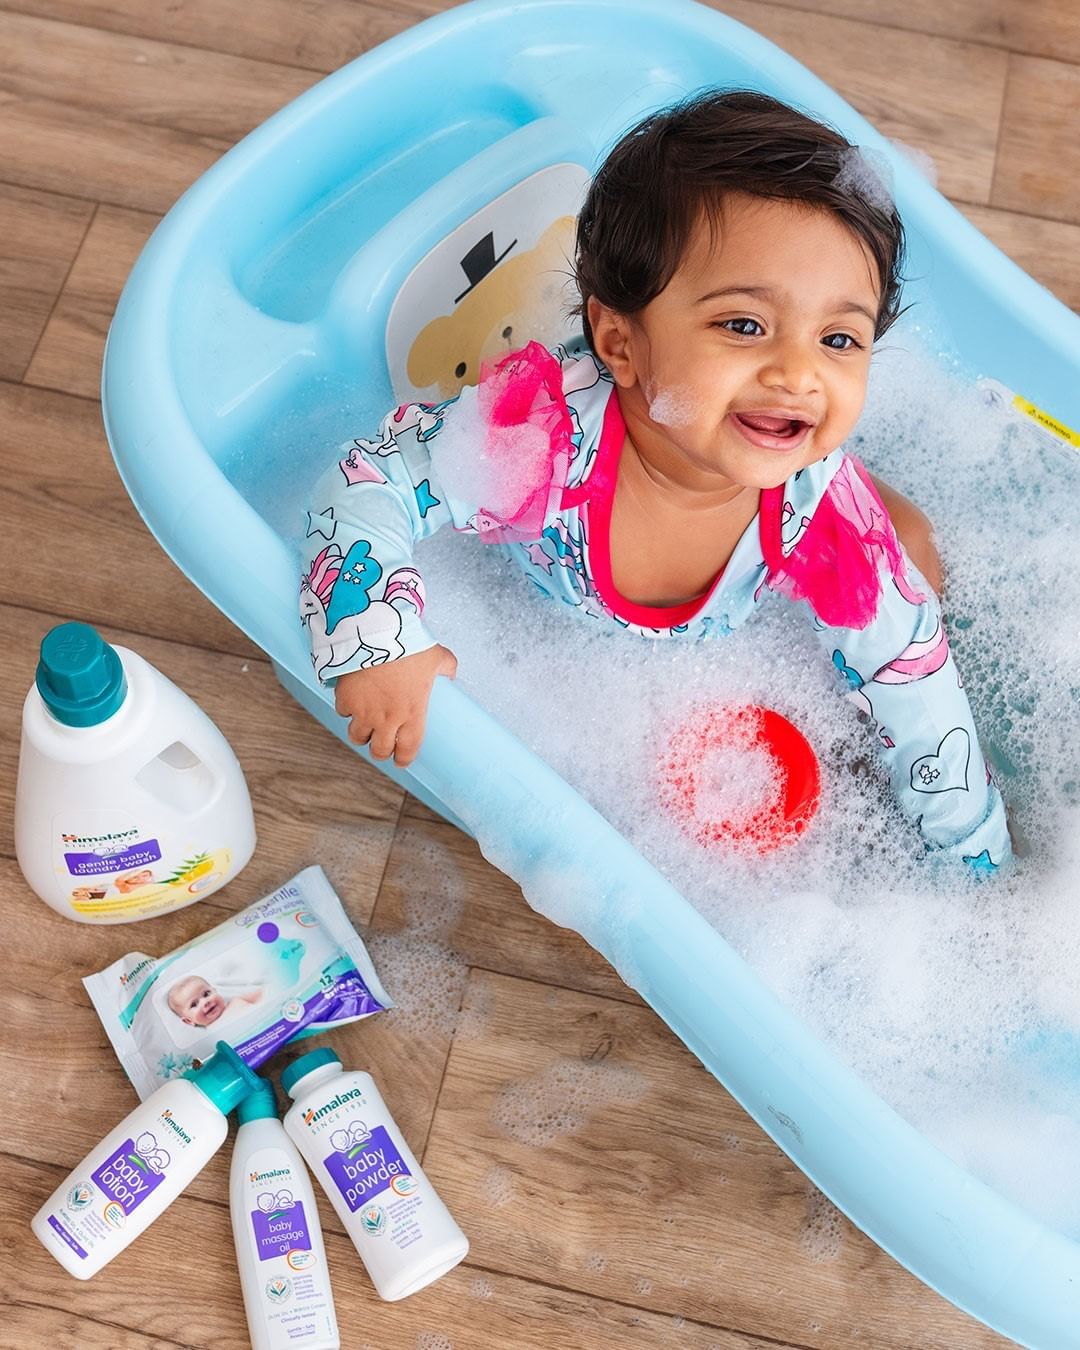 Hopscotch - Isn't bath time the best time!🧼 🛁
Up to 25% OFF on bath time and baby care essentials + additional 10% OFF. 
Use Code : CARE10
Shop now using the link in bio🔗
T&C apply.
📸 : @mommyshotsbya...